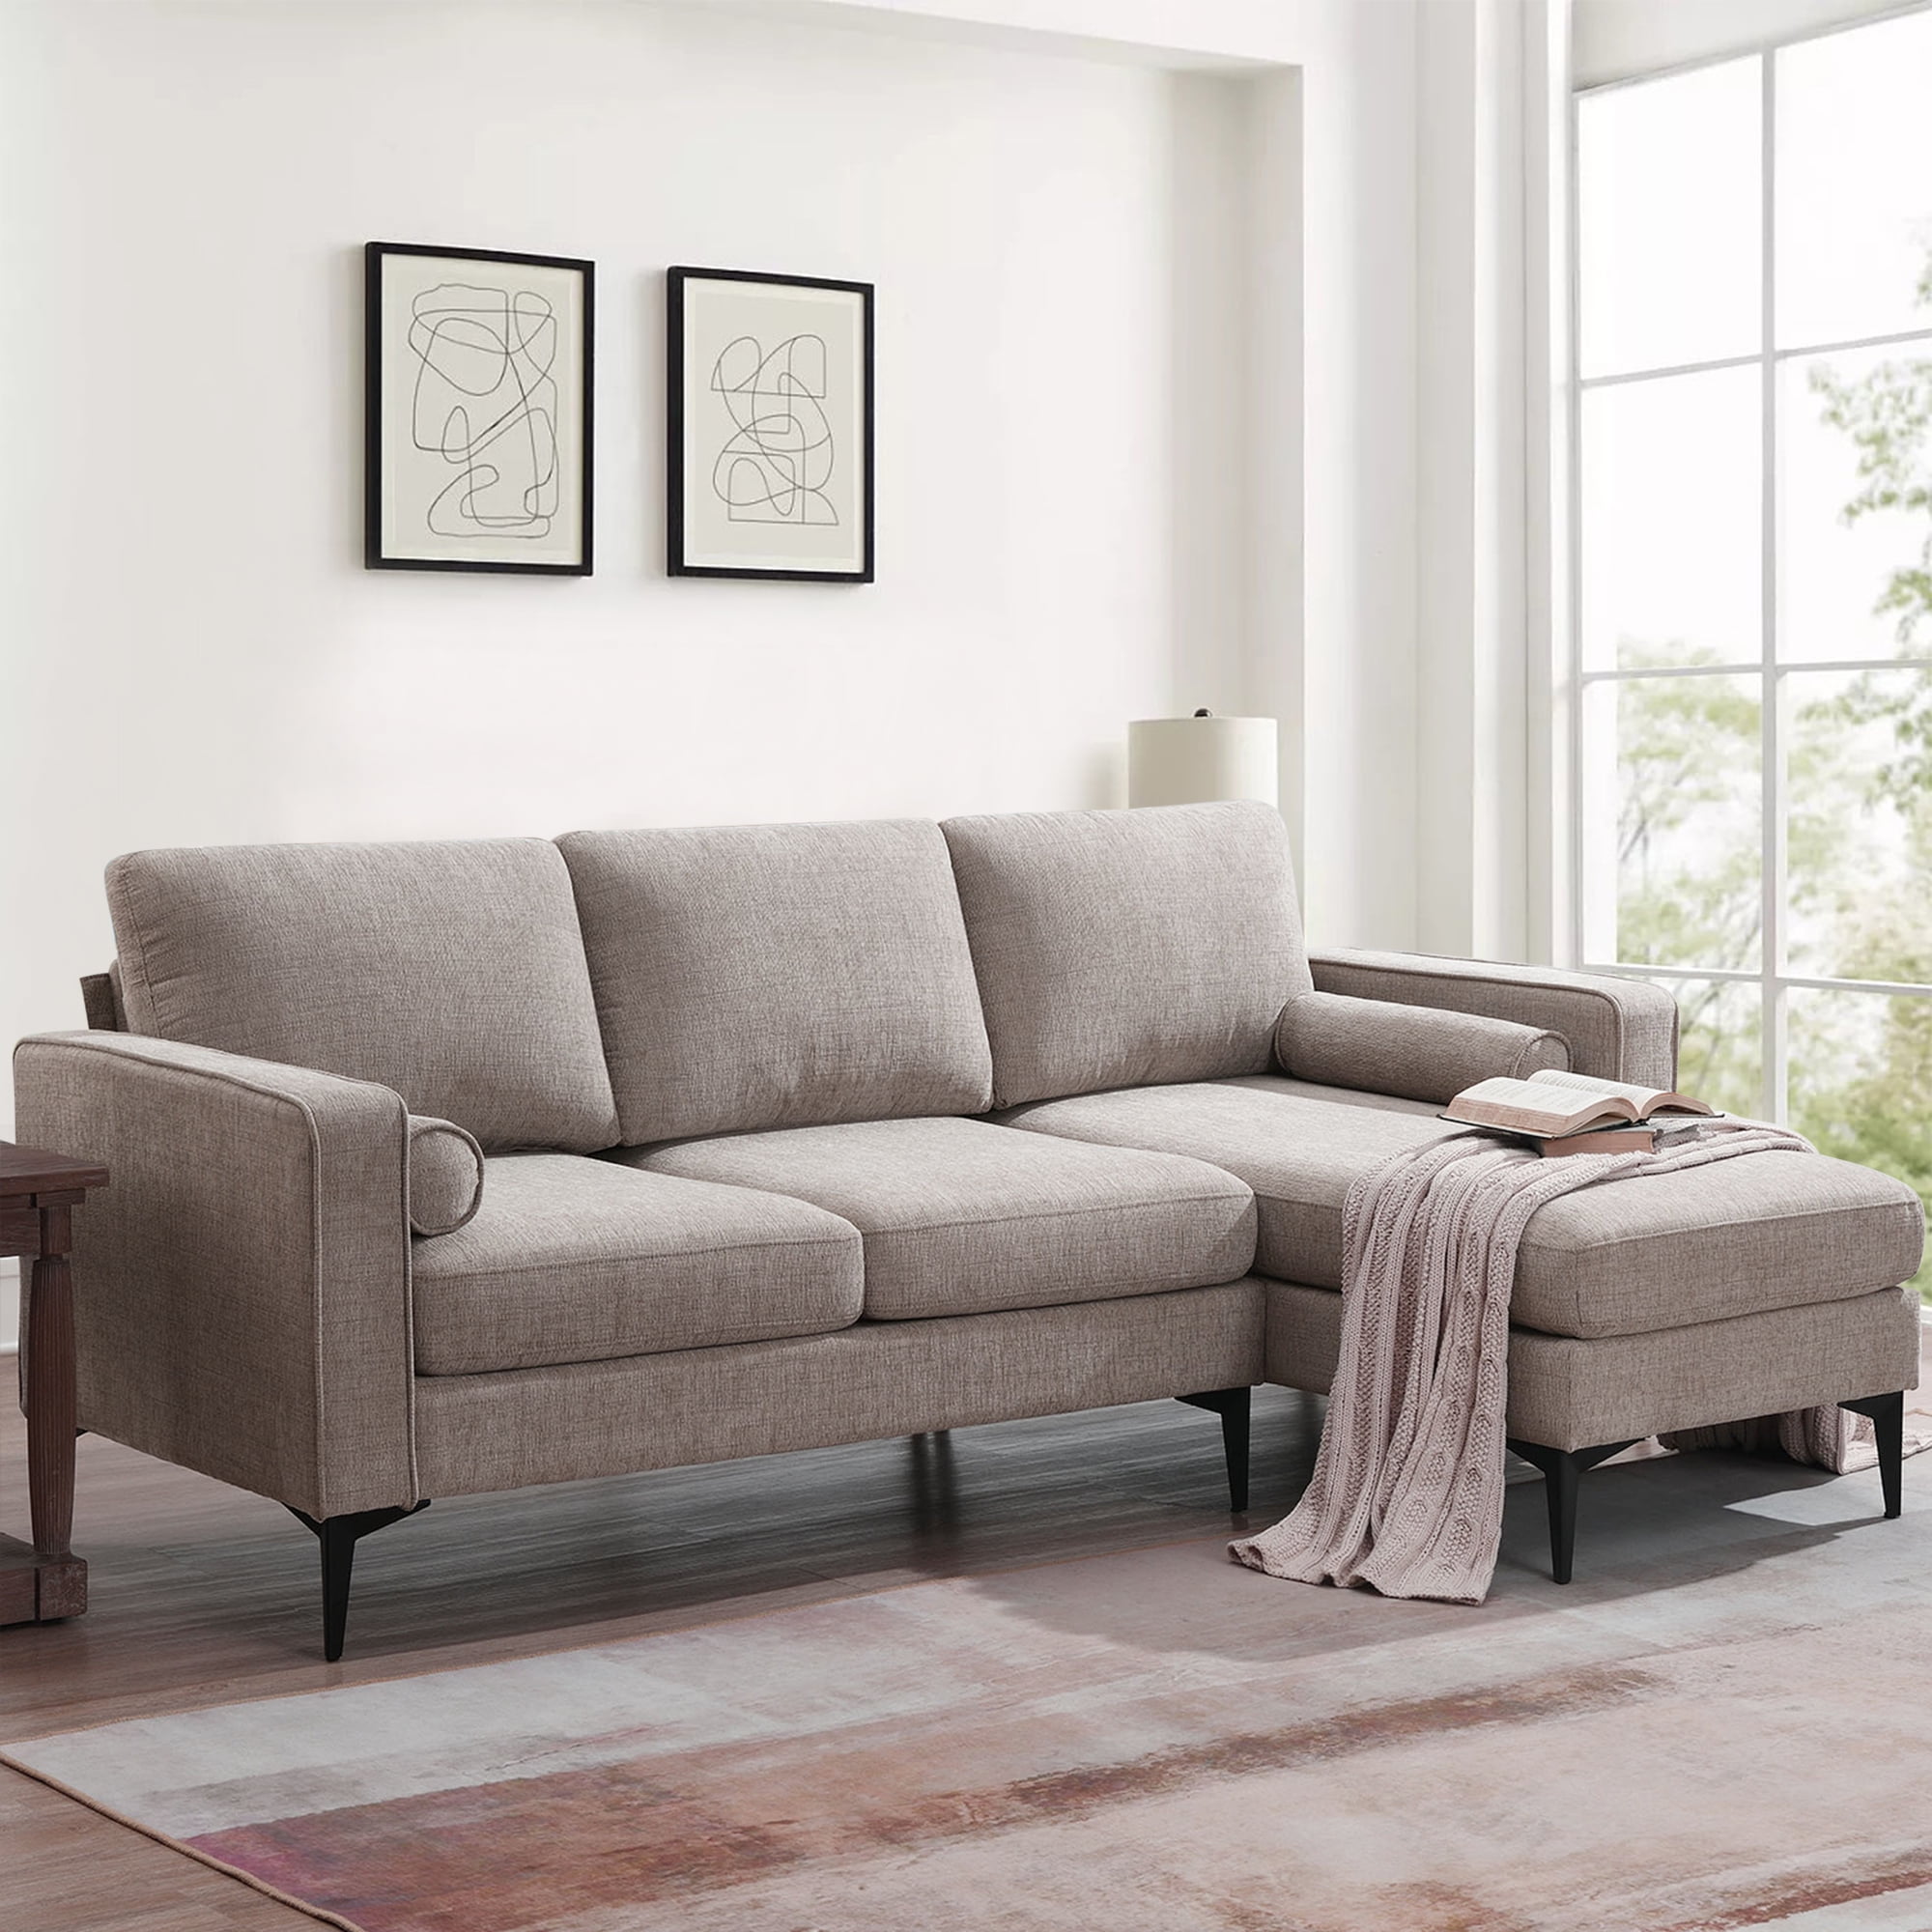 3-Seat Room, Reversible Euroco Couch Sectional Chaise, Modern Sofa for Living with Camel Sofa 86\